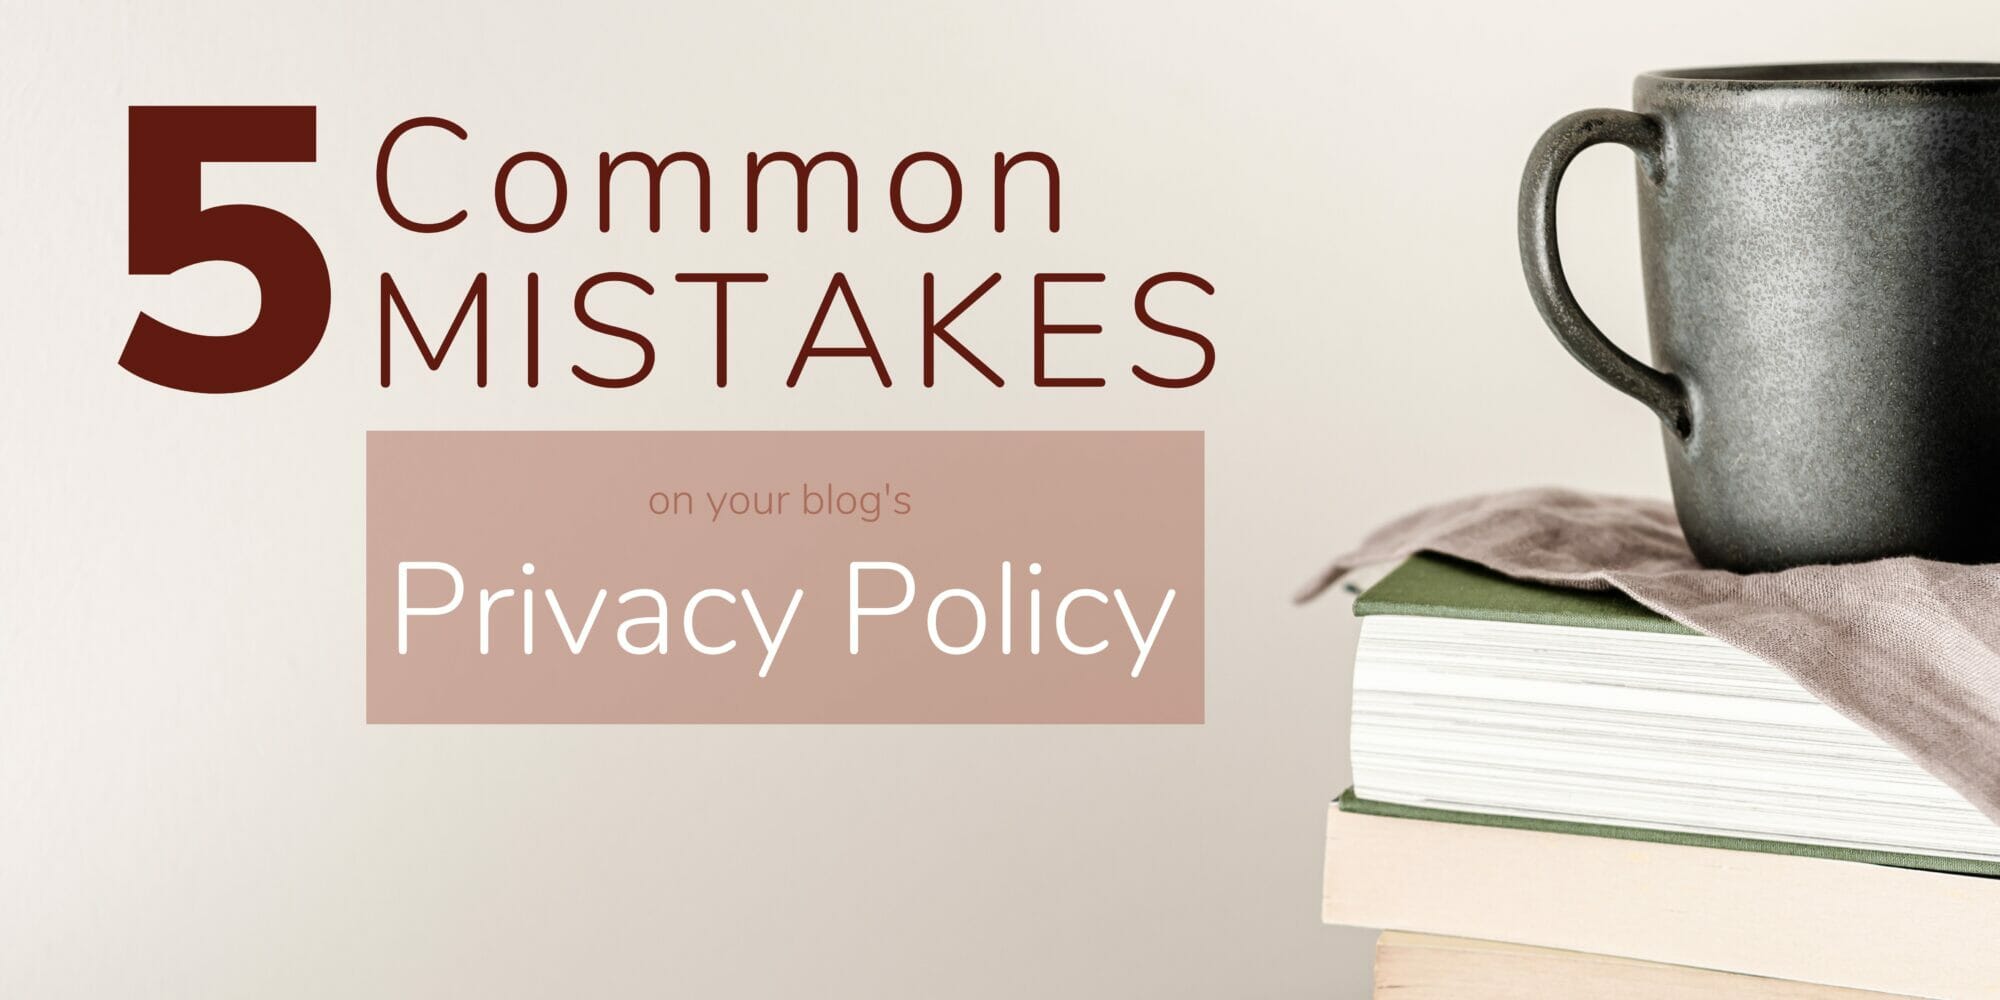 Avoid These 5 Common Mistakes When Writing Your Blog’s Privacy Policy